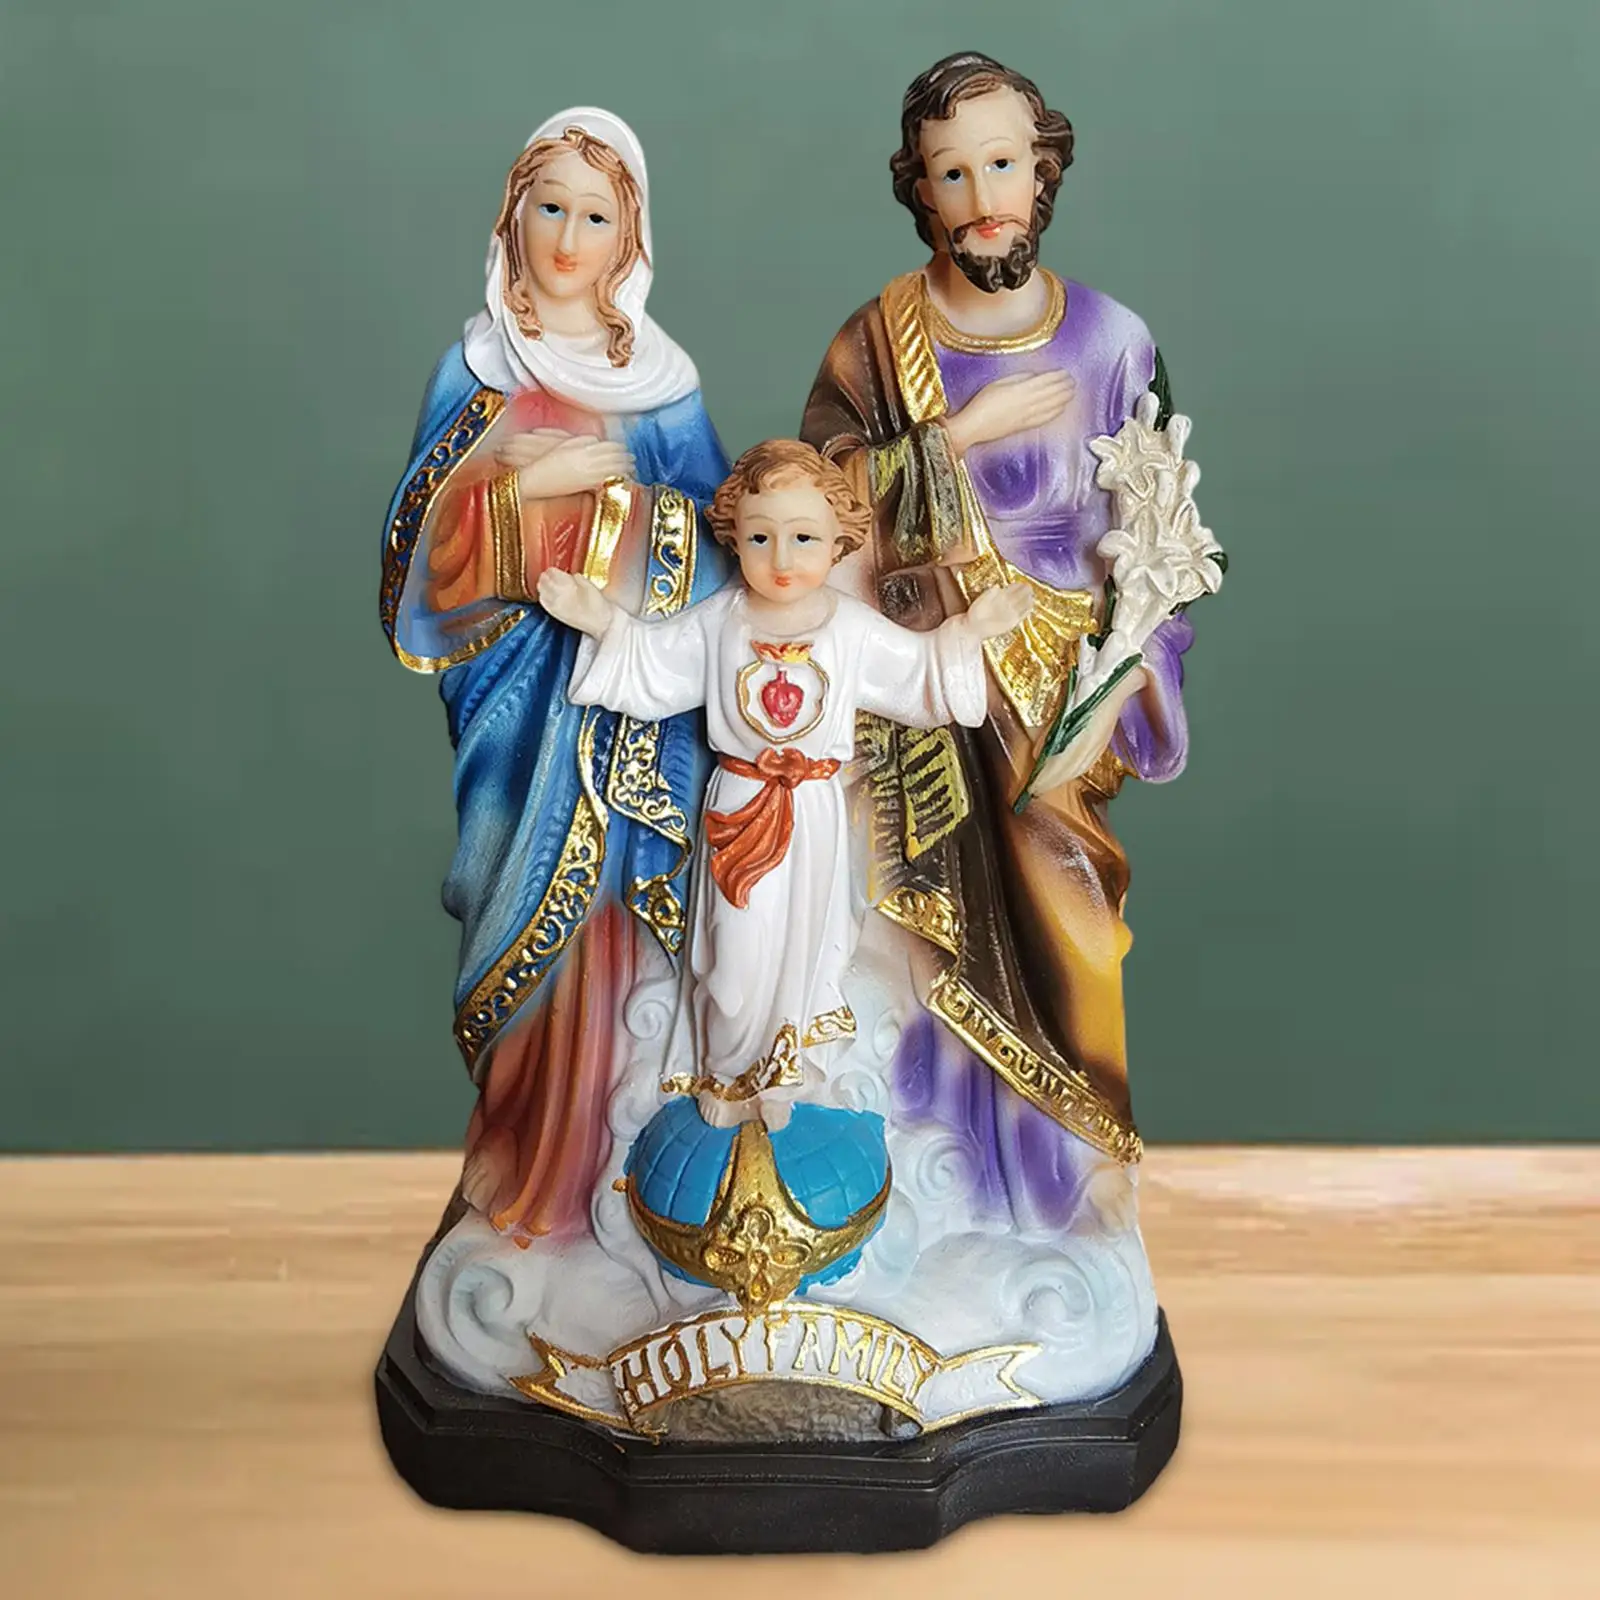 Holy Family with Child Figure, Religious Sculpture Resin Religious Gift Religious Holy Family Figures for Tabletop